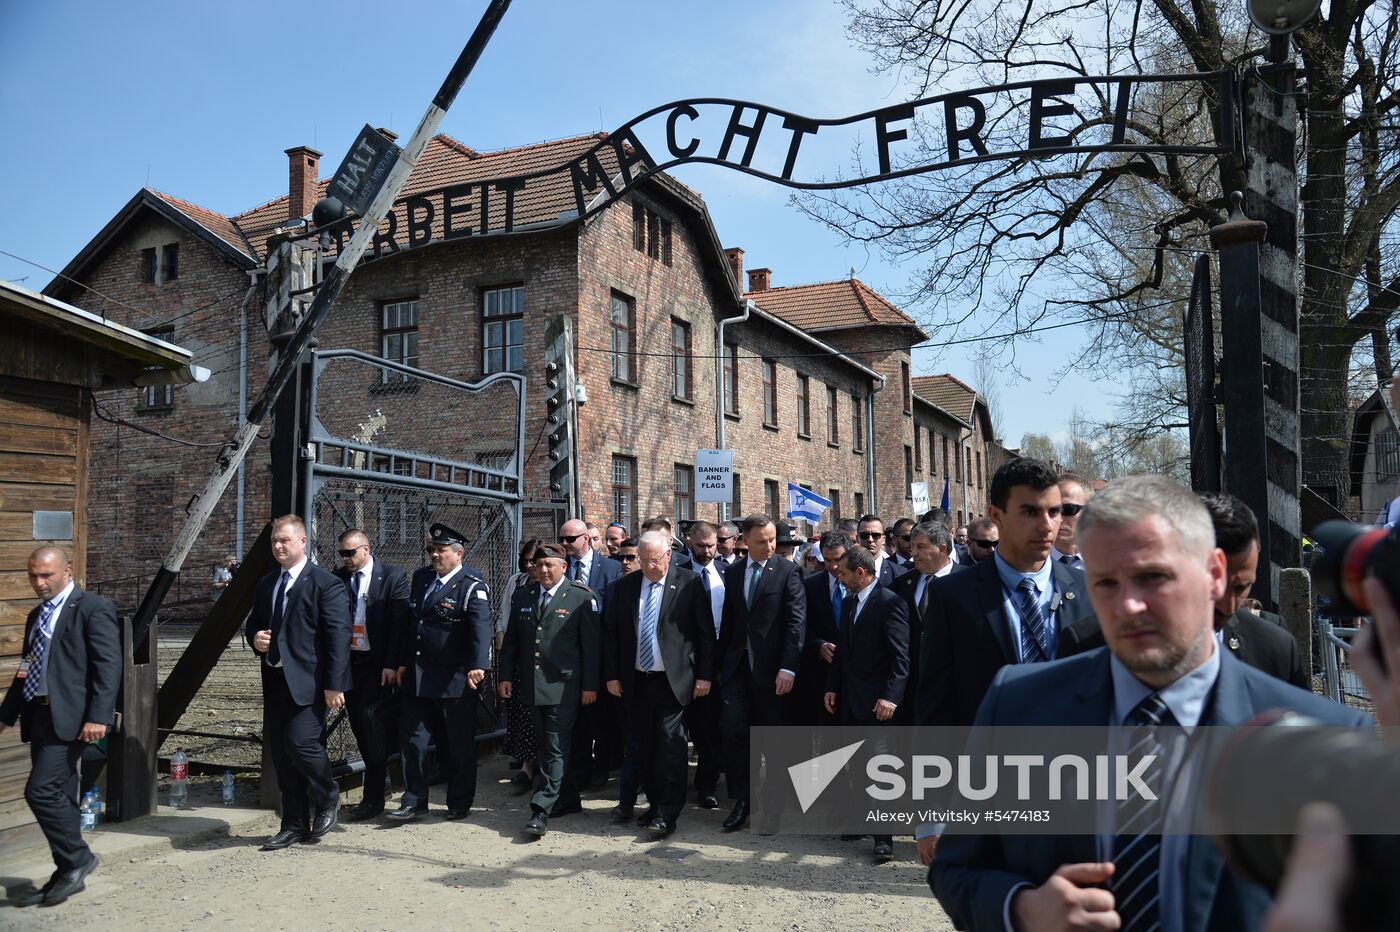 March of the Living in Auschwitz